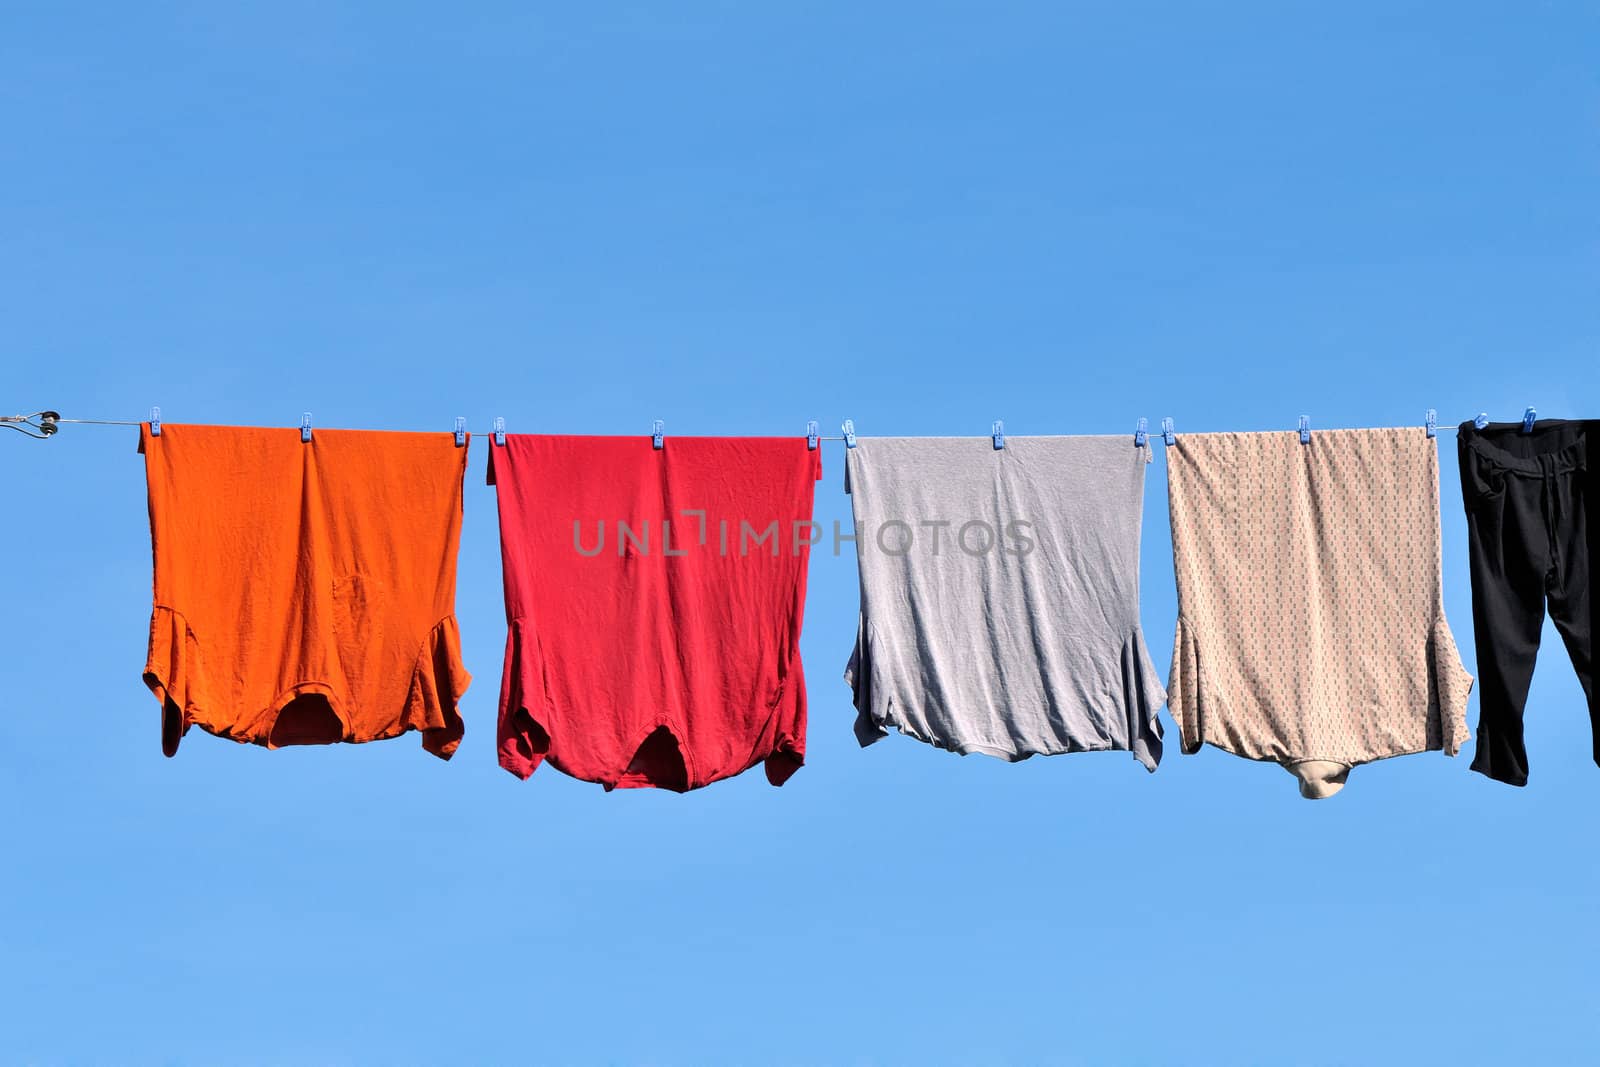 Clothes drying on a rope